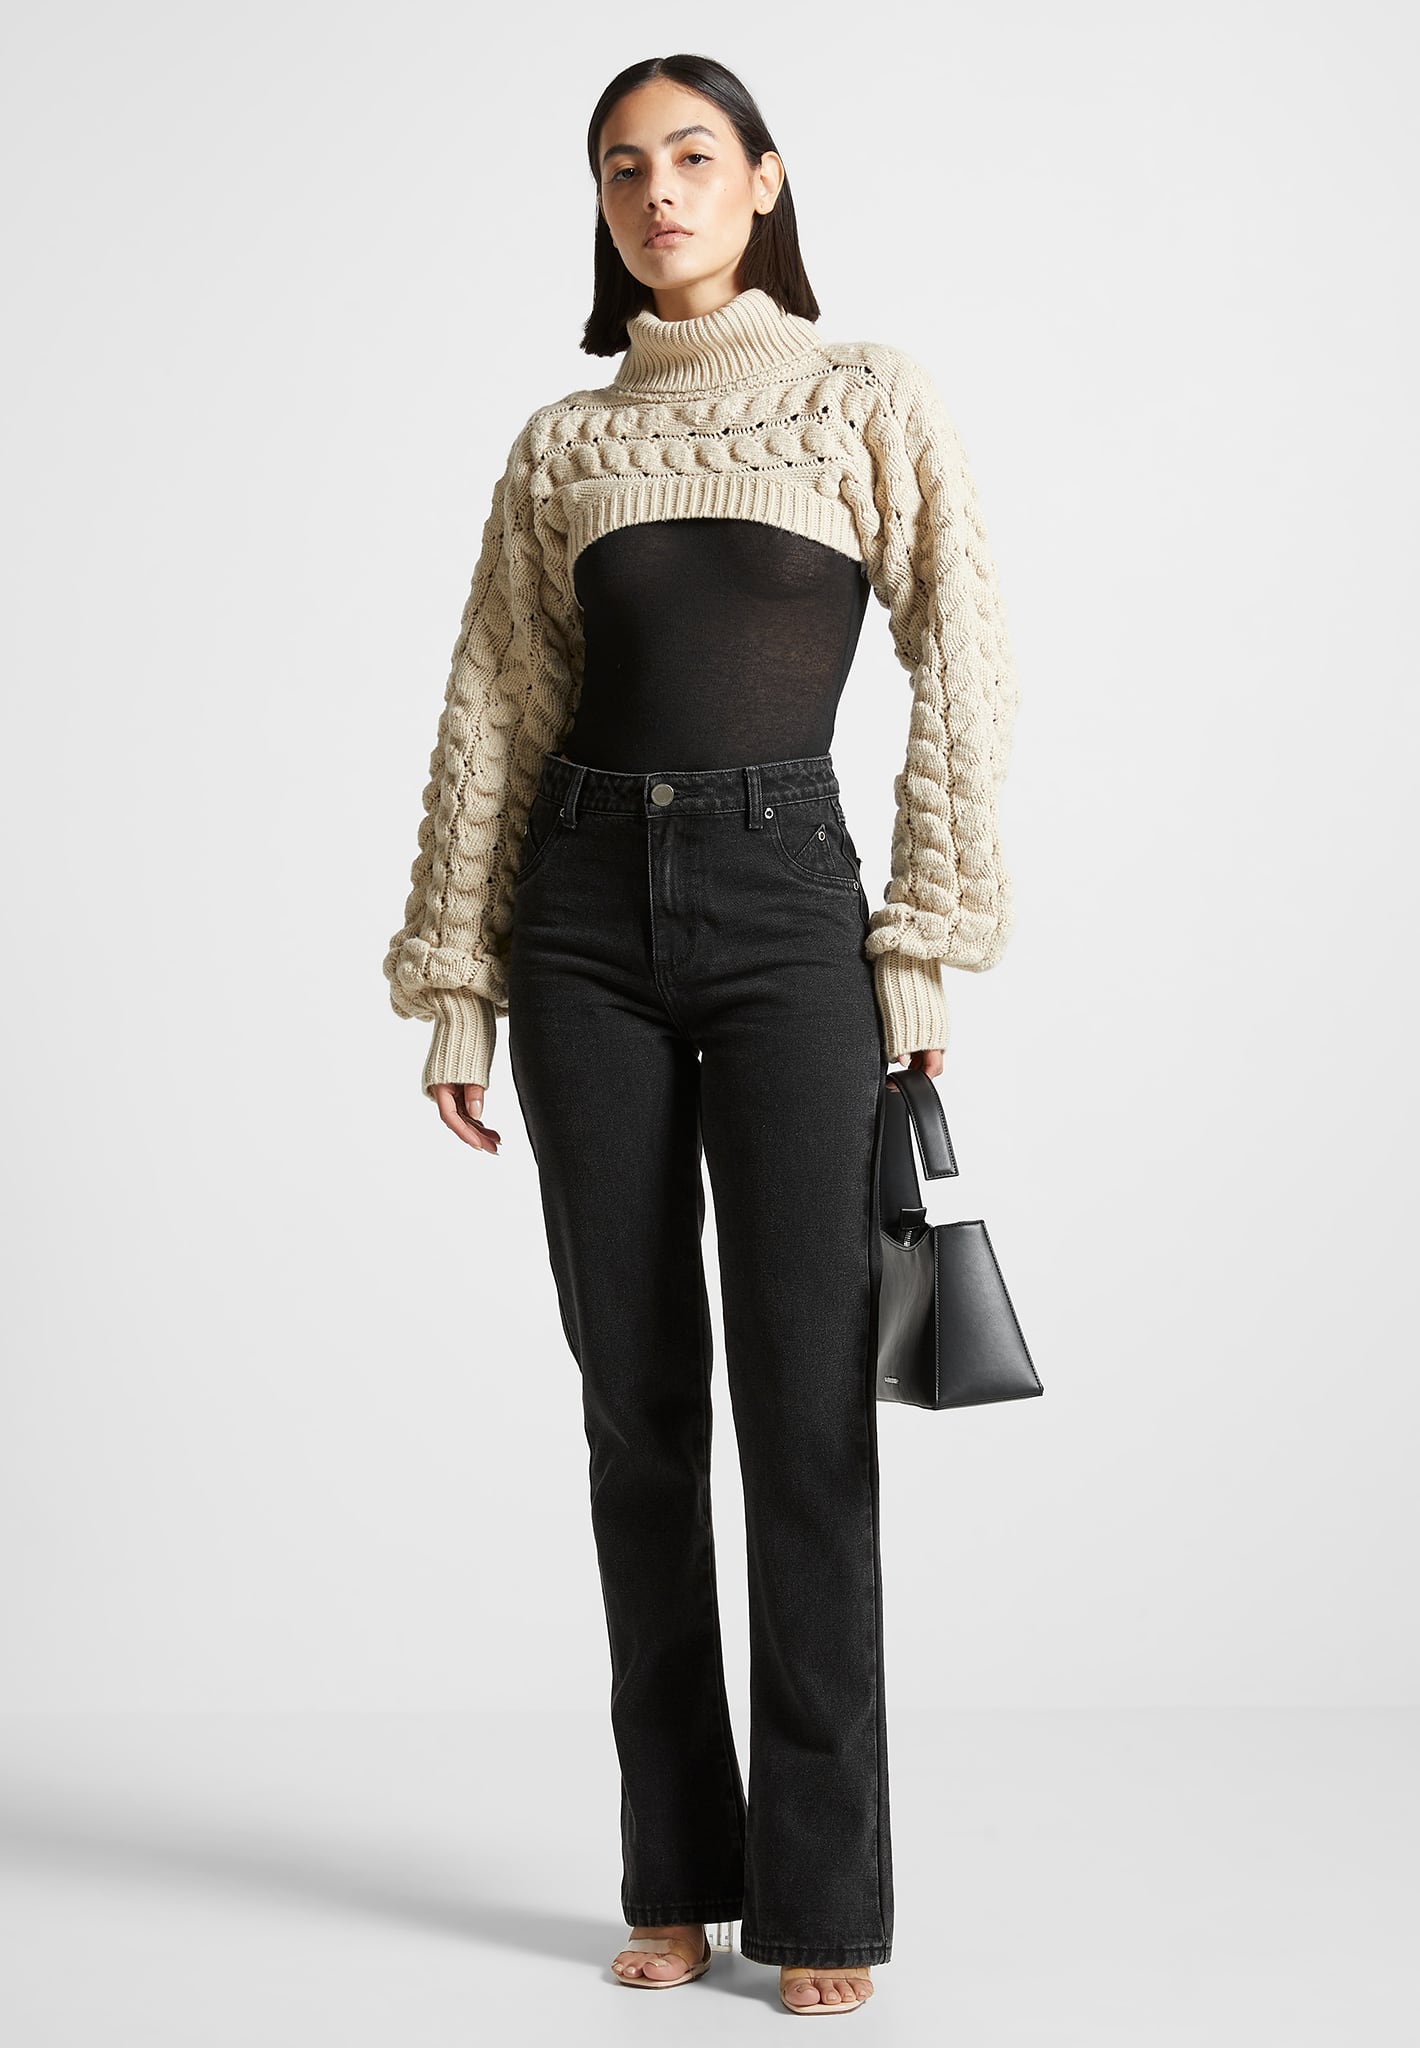 turtleneck-cable-knit-arm-warmers-beige